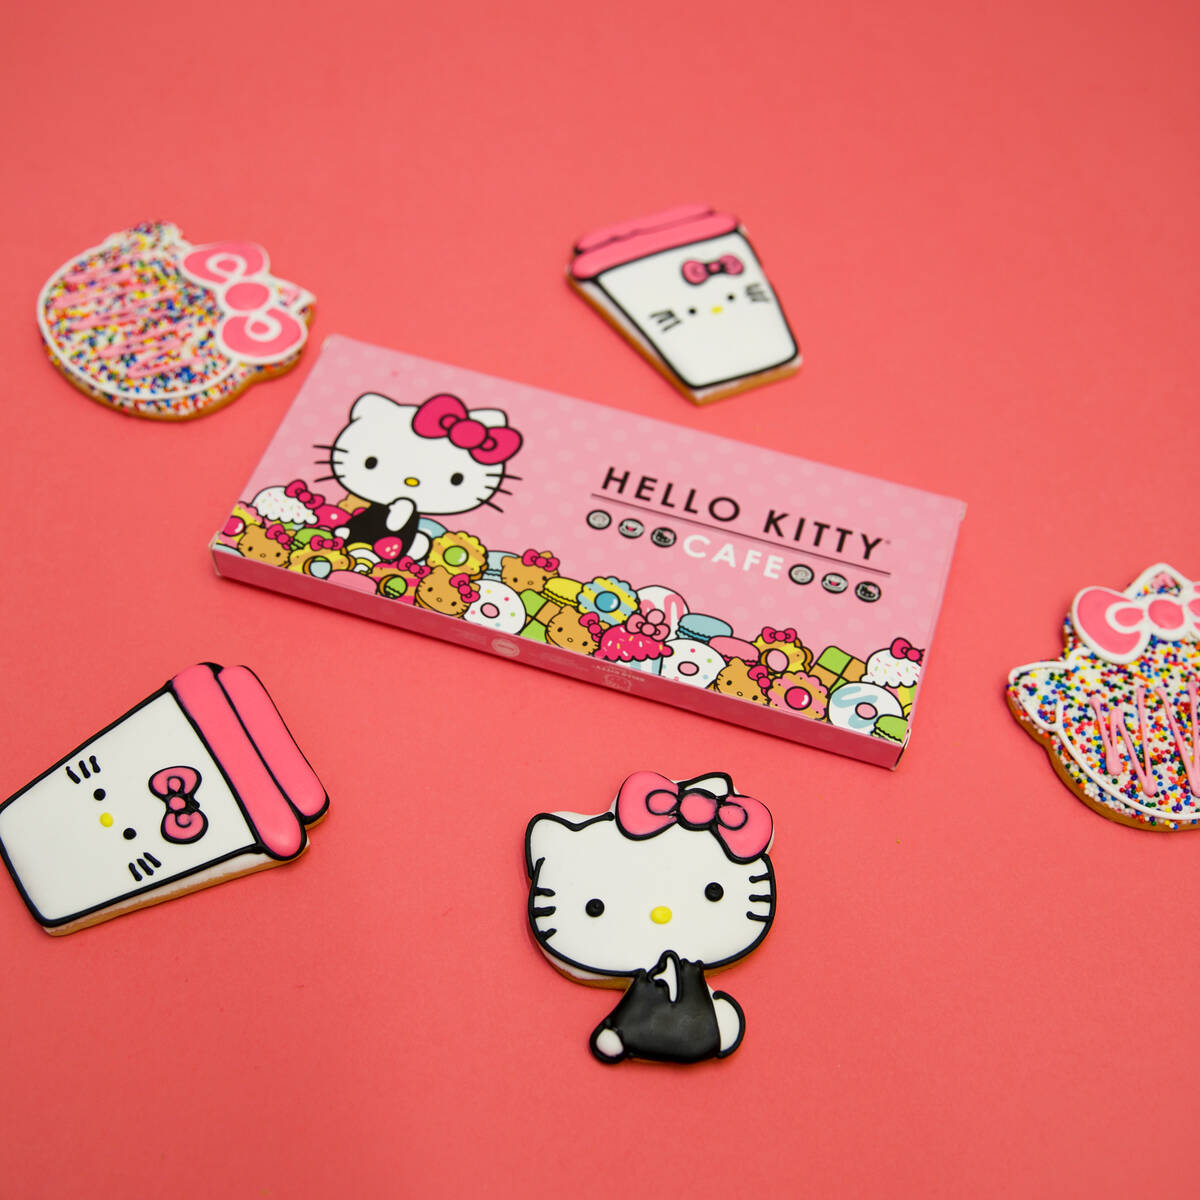 Find out where to get your Hello Kitty Cafe fix once pop-up store